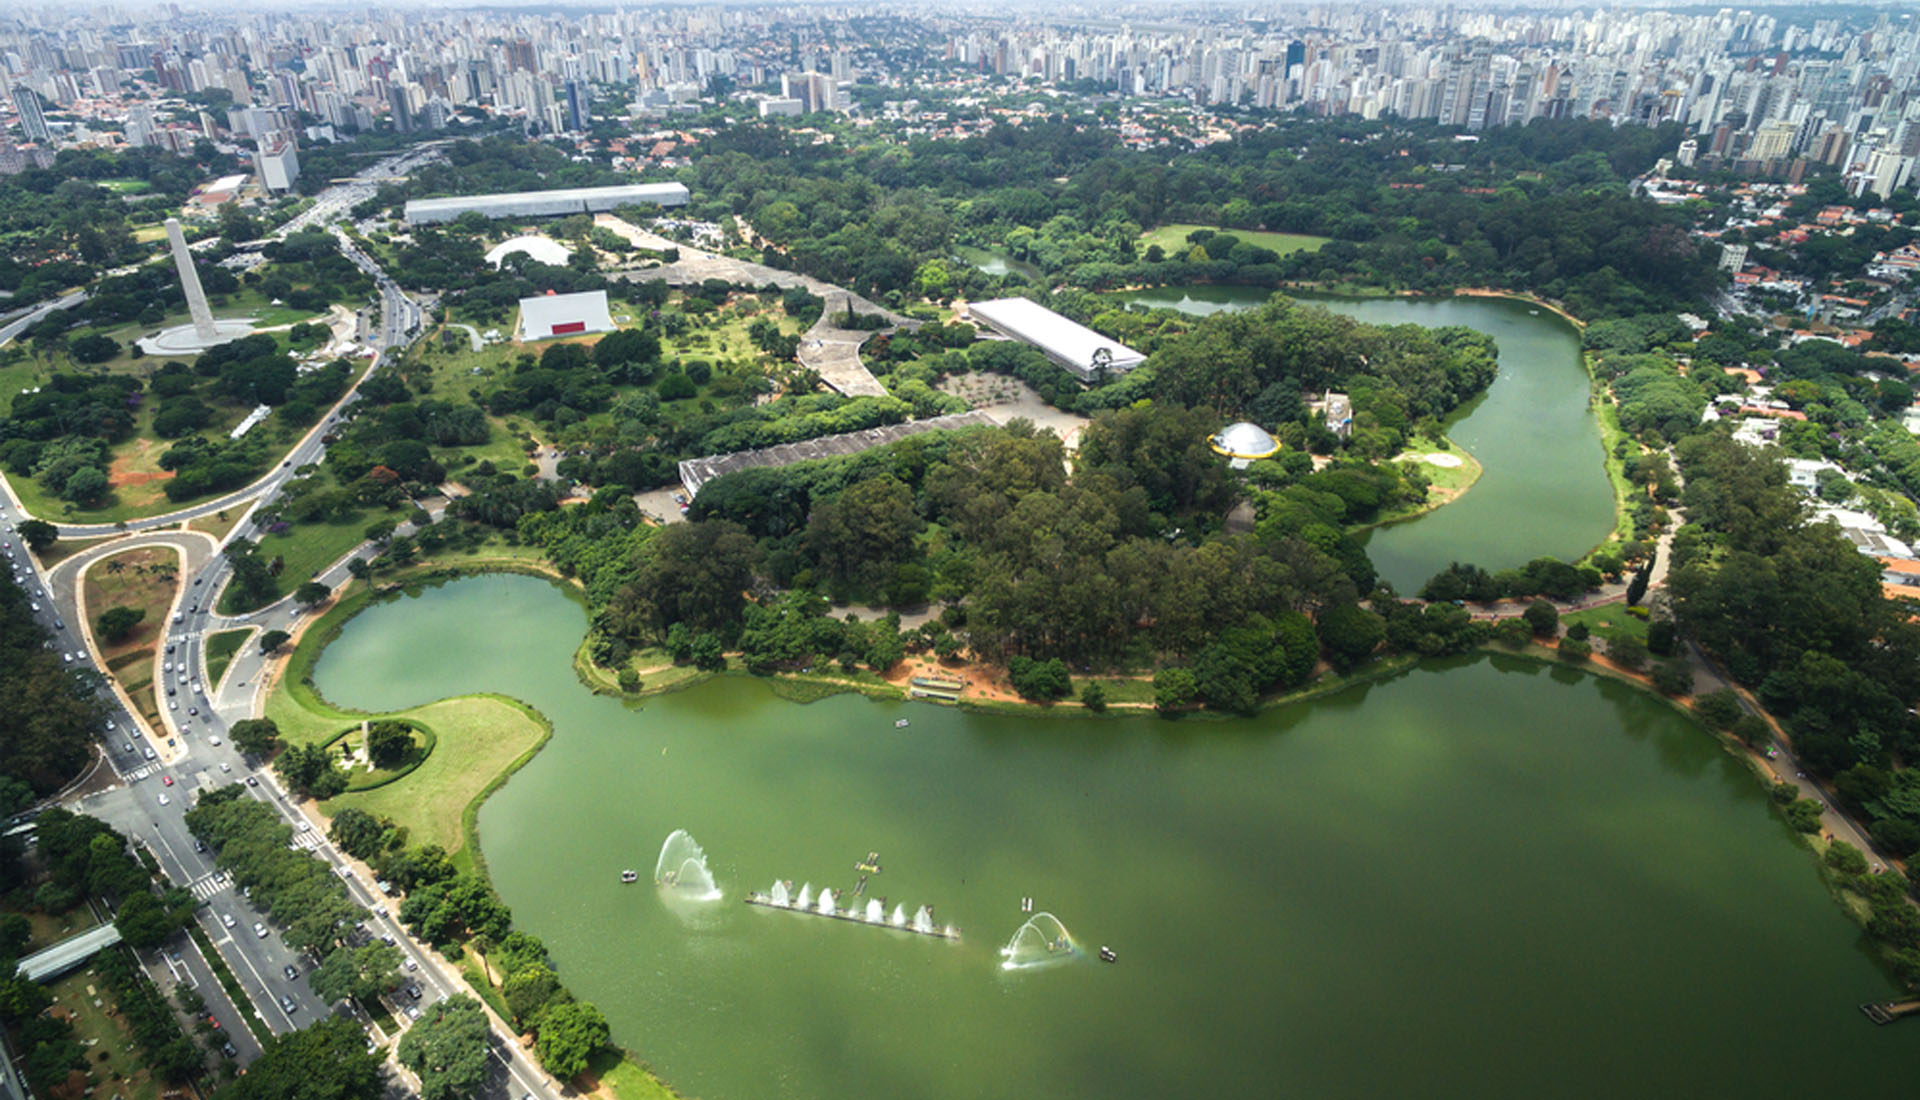 São Paulo Expects 2.1 Million Visitors During Long Weekend - Ibirapuera park. (Photo Internet reproduction)